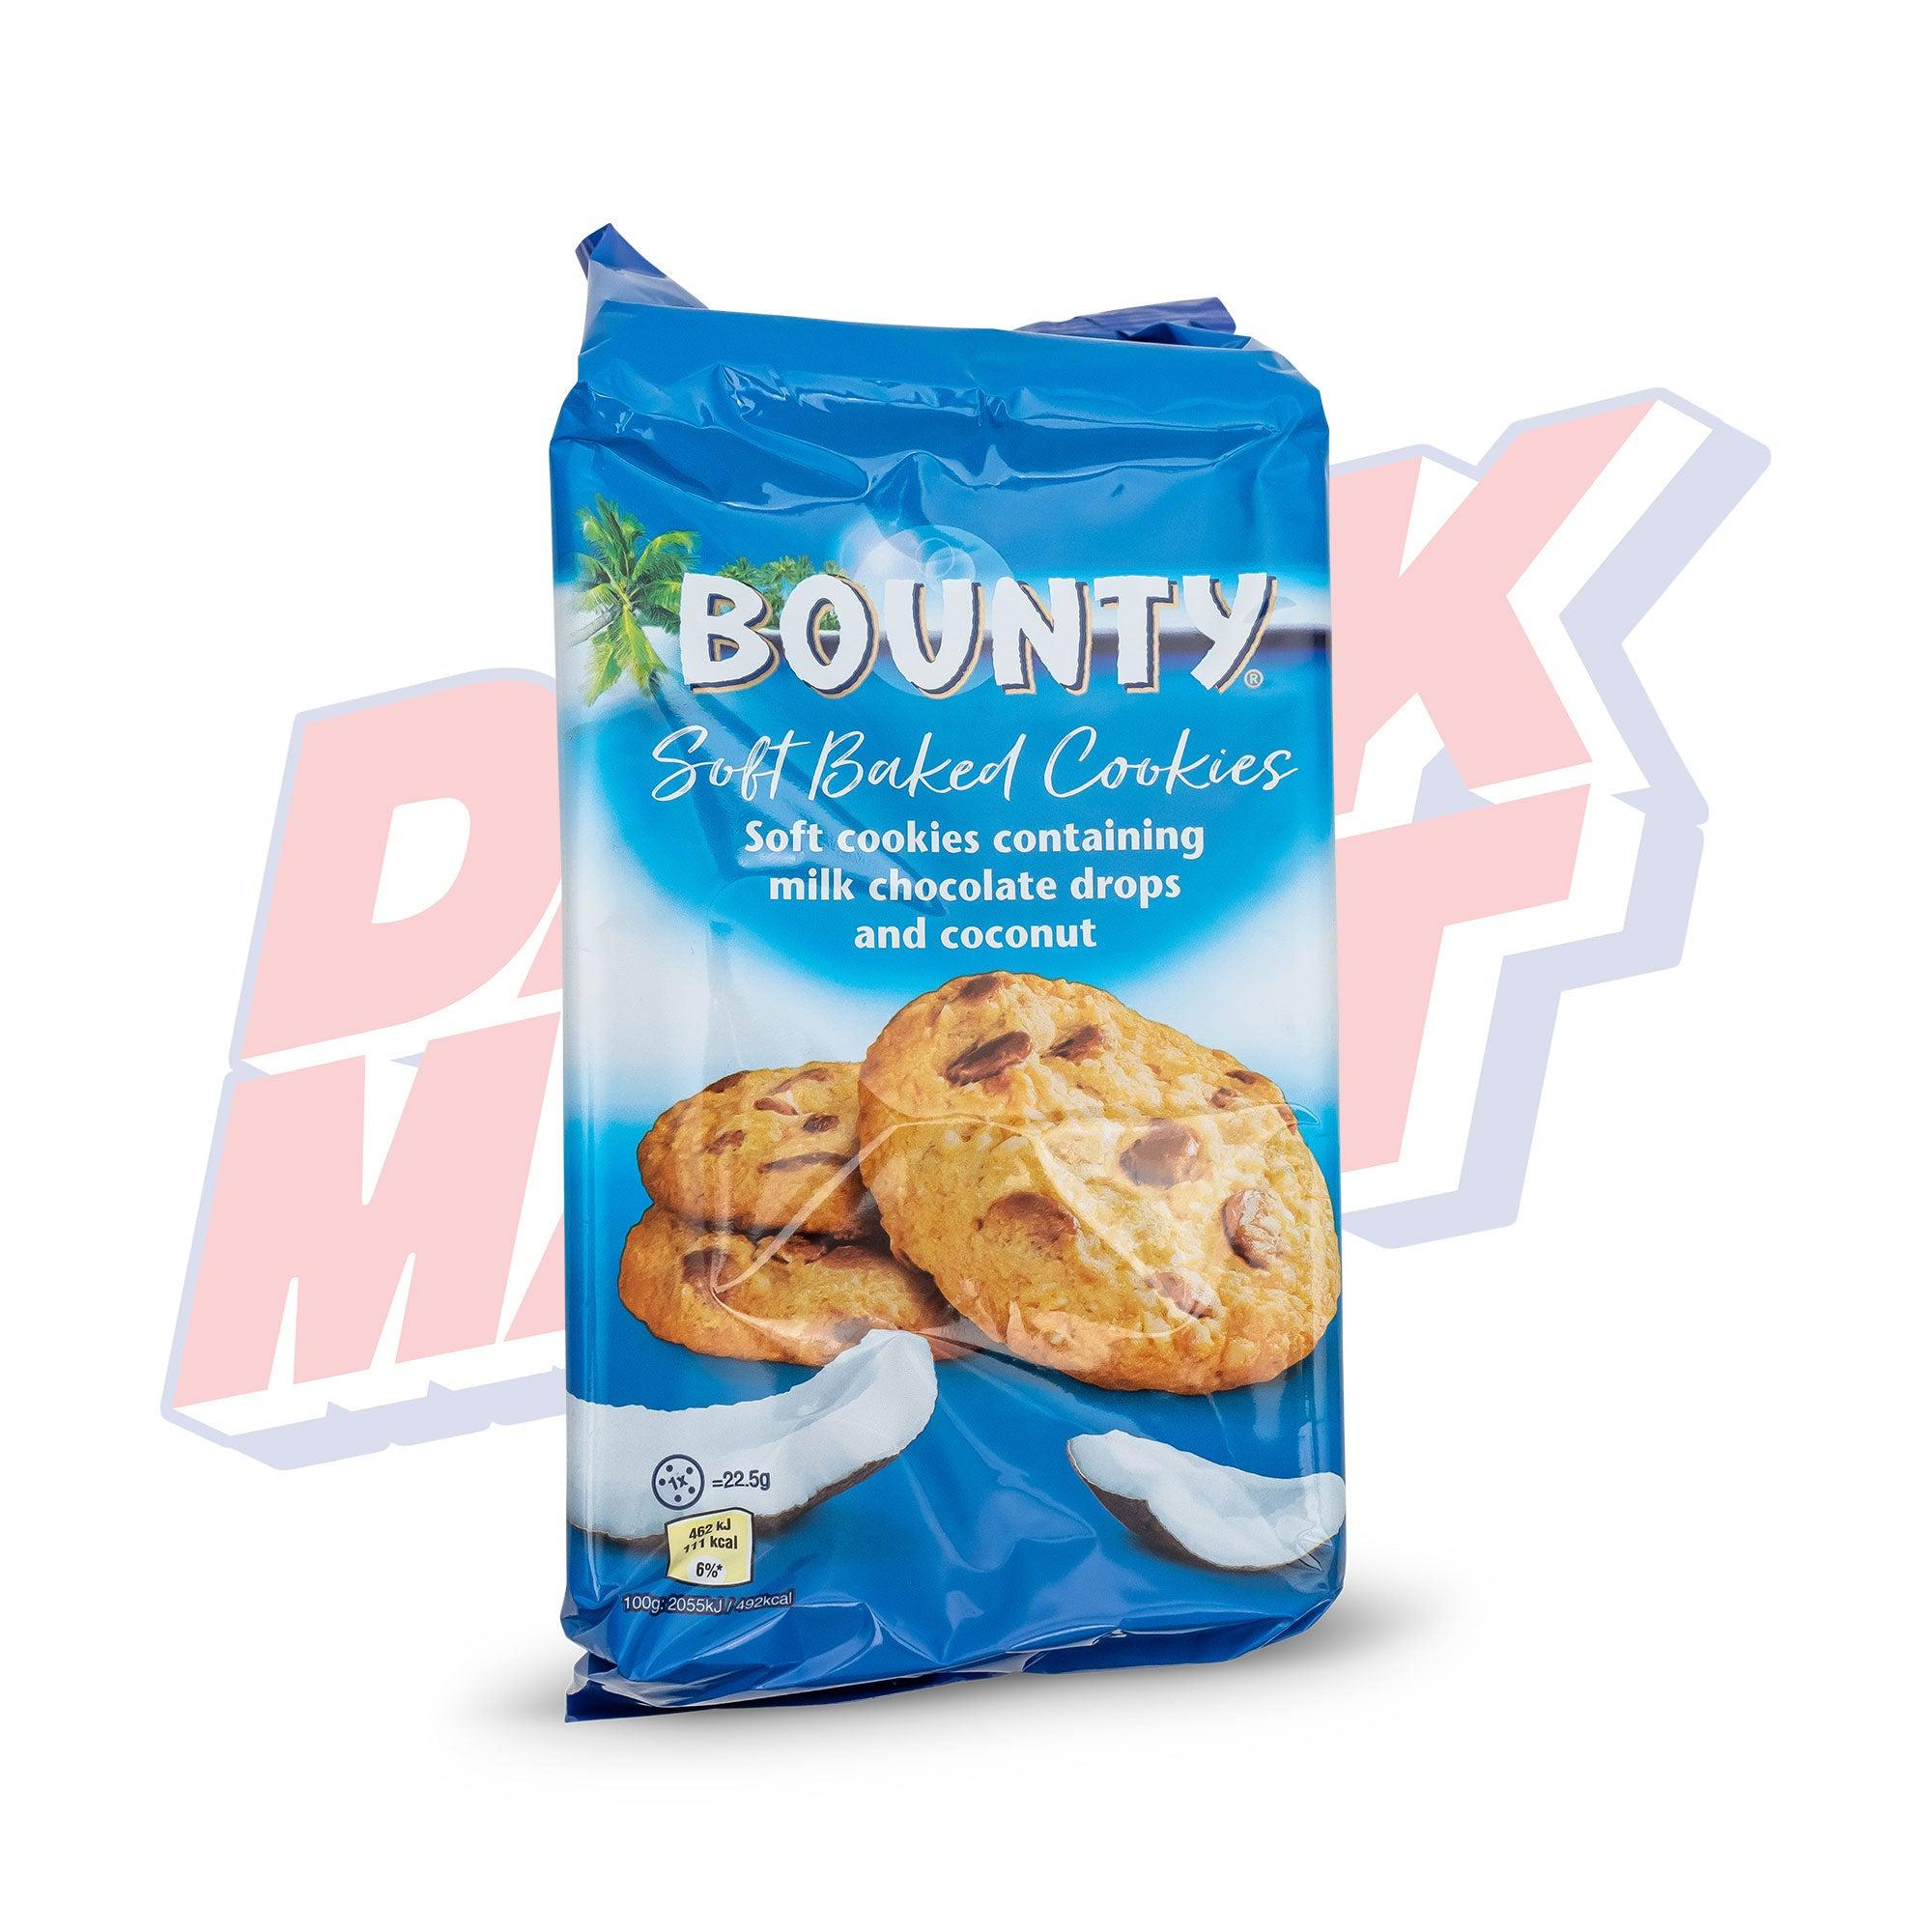 Bounty Soft Baked Cookies (UK) -108g